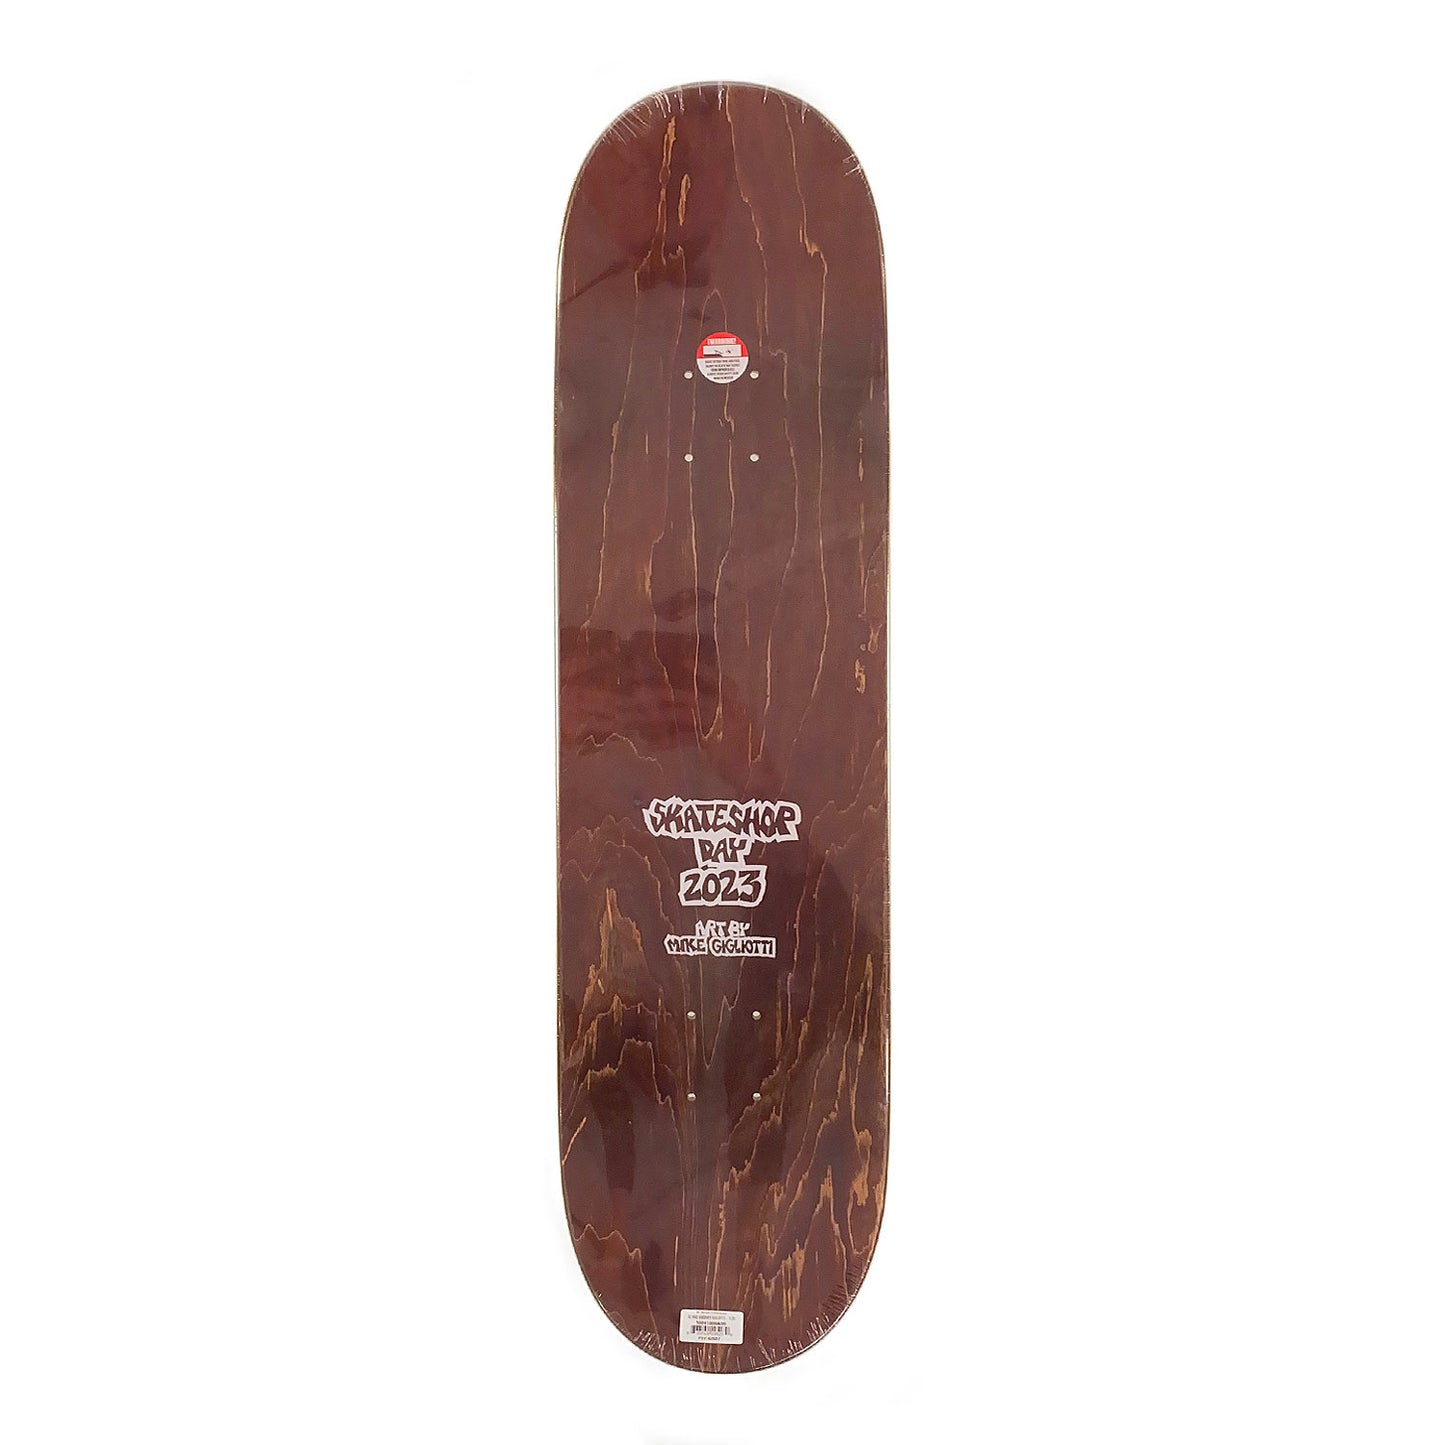 DLX x Skateshop Day 2023 deck by Mike Gigliotti - Assorted Veneers - 8.25" - Prime Delux Store